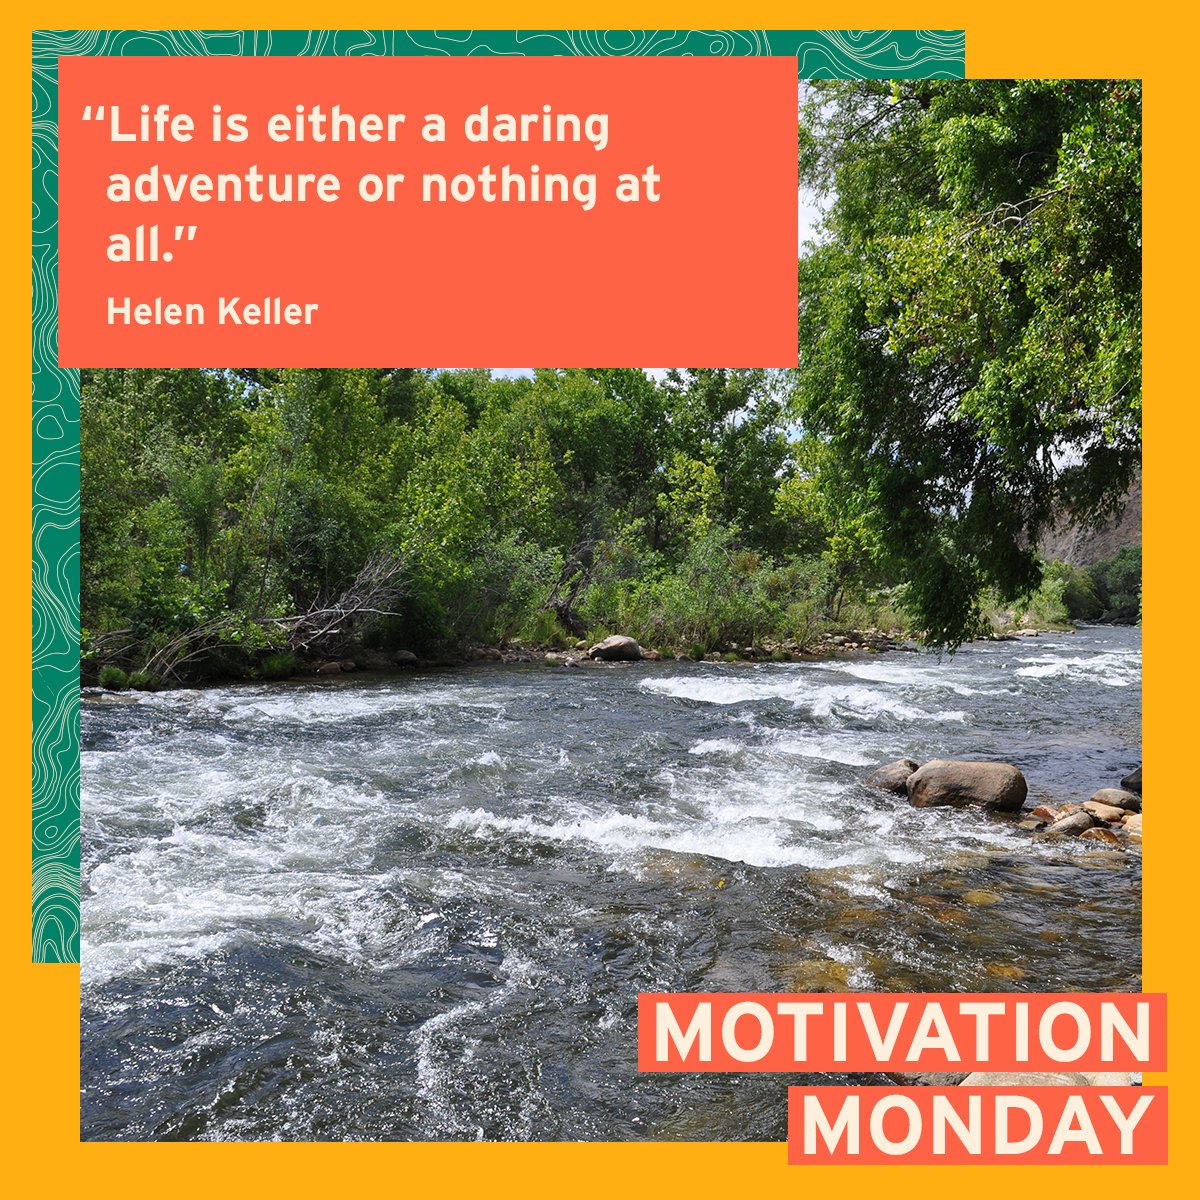 Start the week off with some motivation!
#MotivationMonday #GORVING